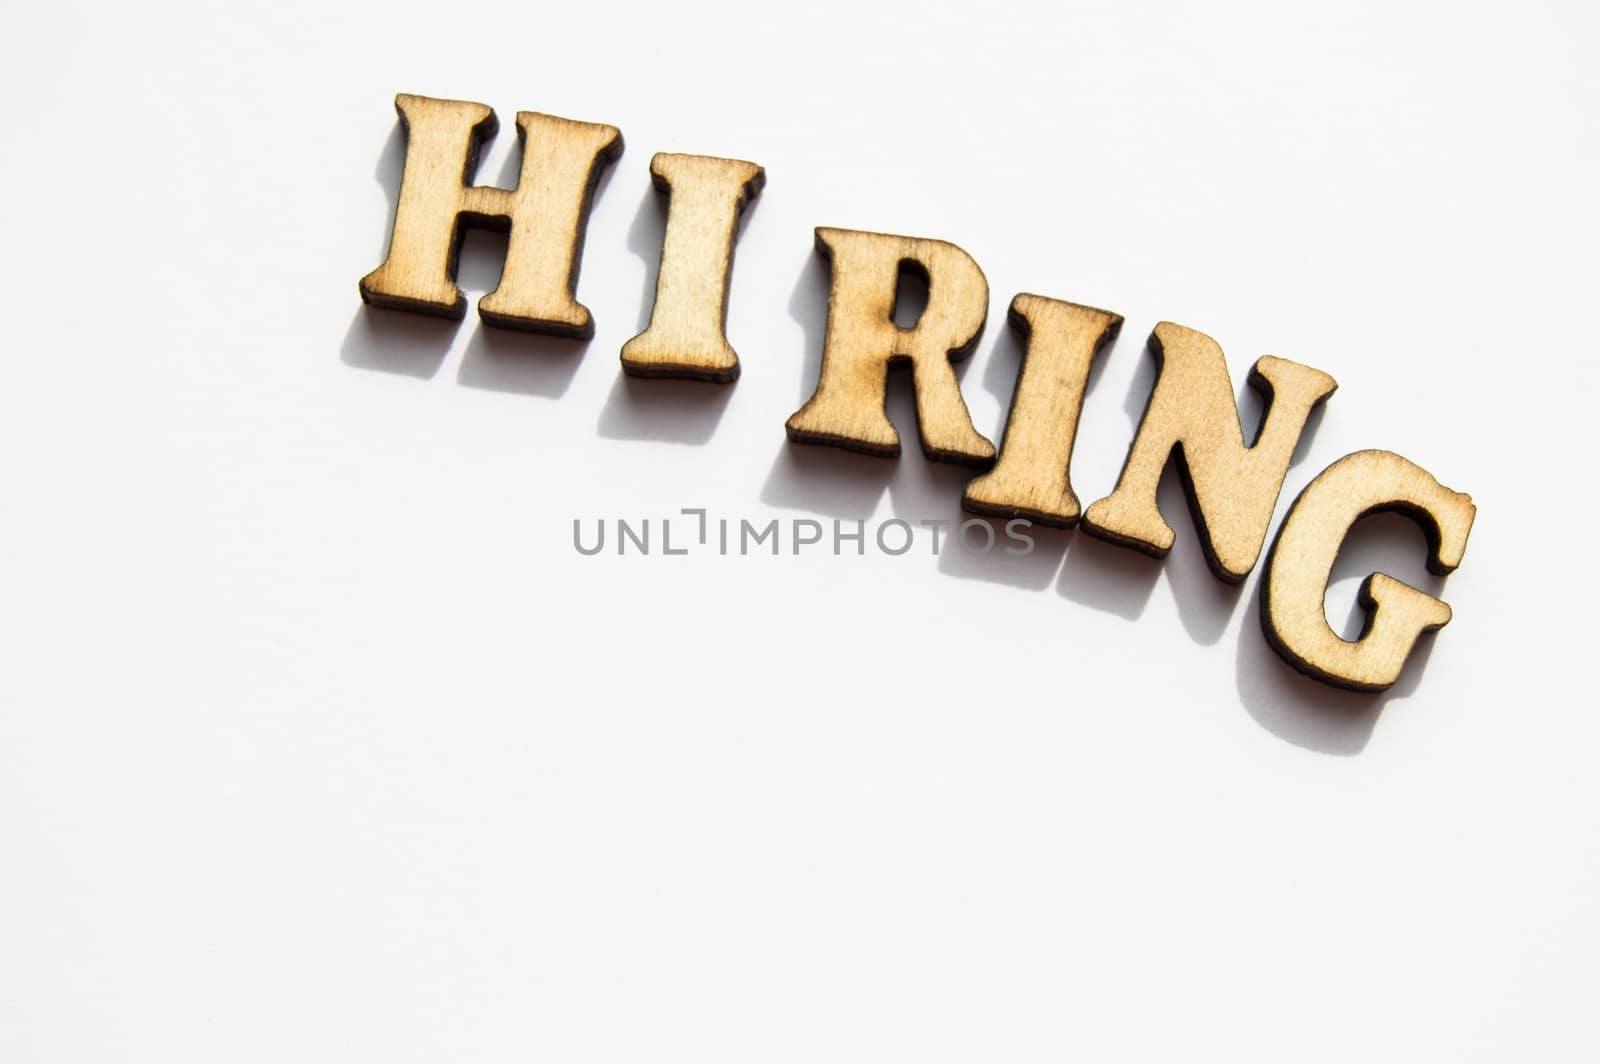 The word hiring is written in gold letters, isolated on white background, copy space, mockup for designer.